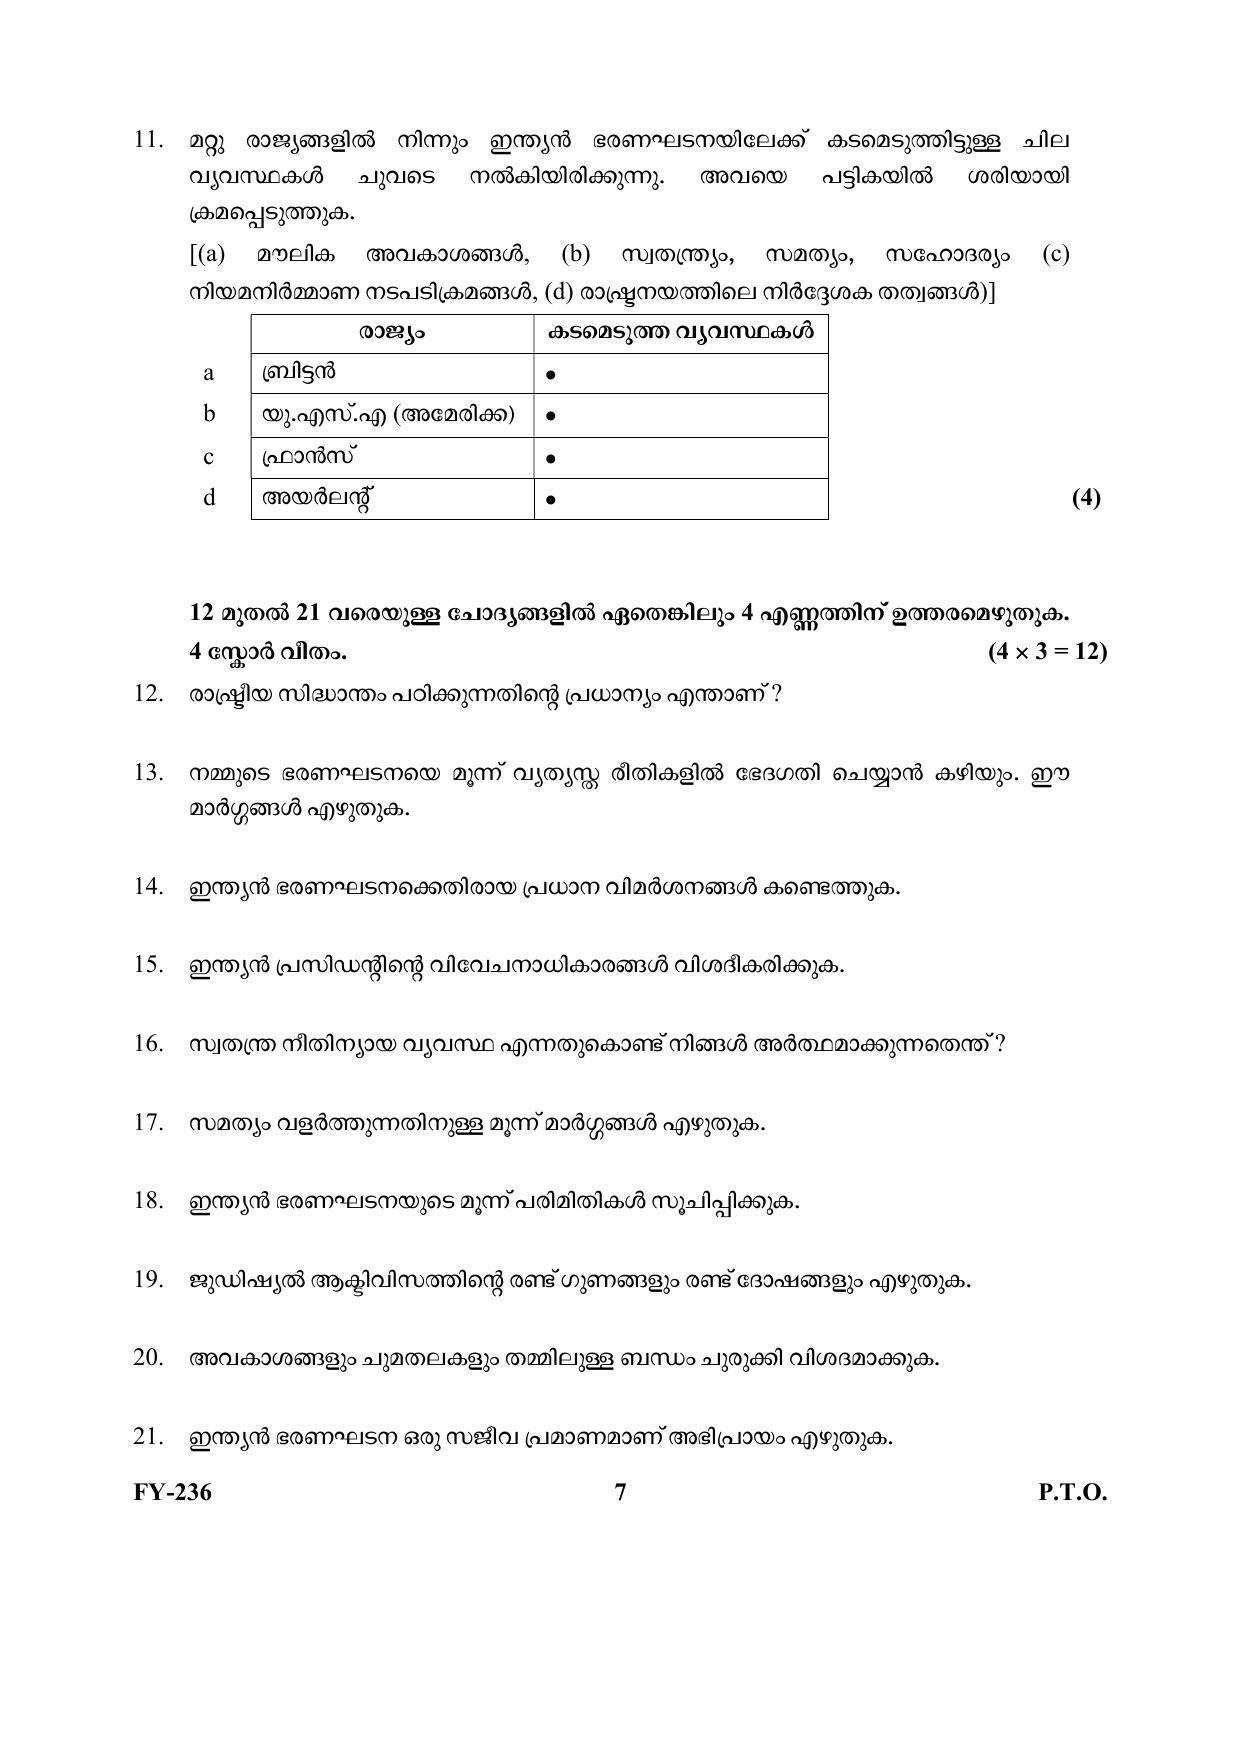 Kerala Plus One (Class 11th) Political Science Question Paper 2021 - Page 7